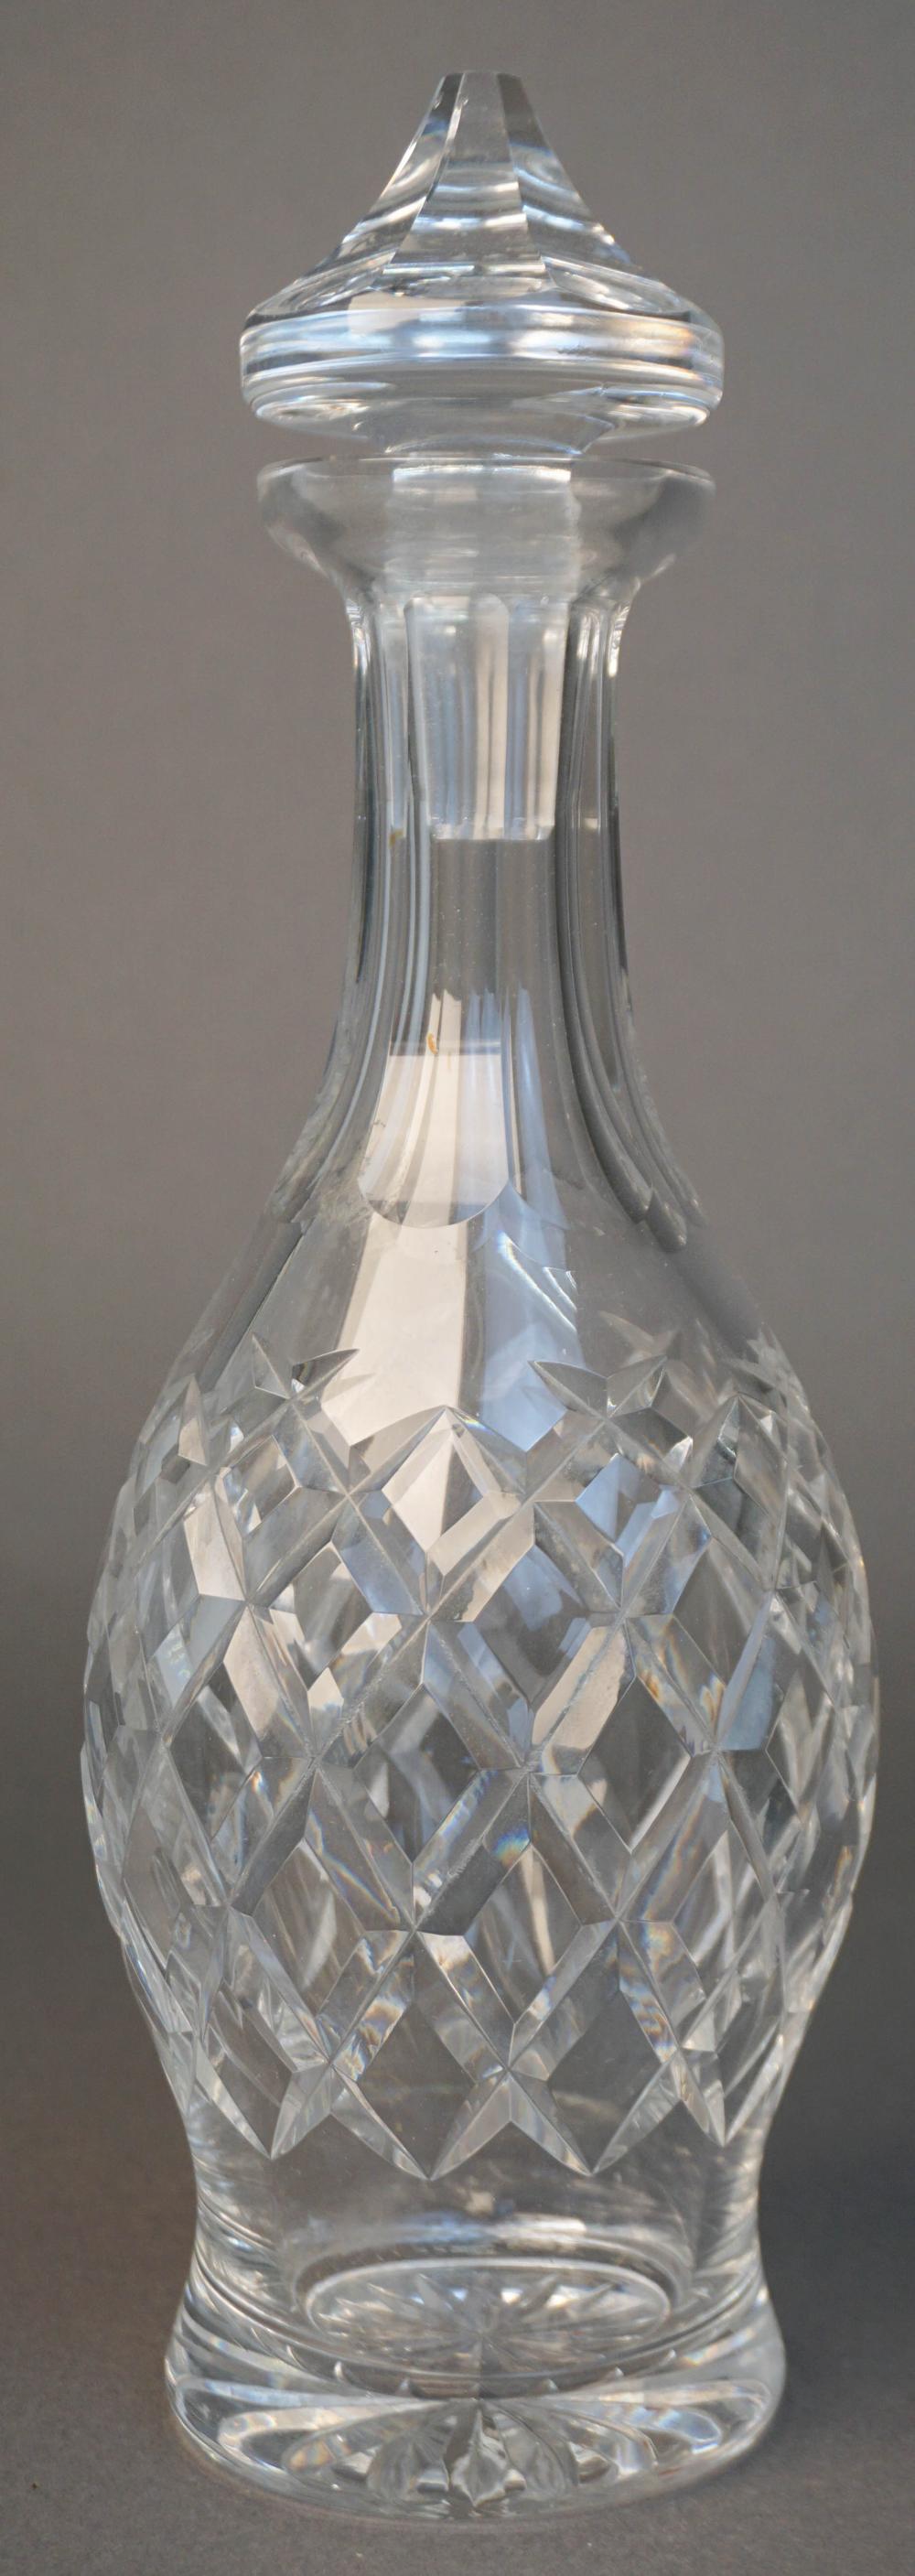 WATERFORD CUT CRYSTAL DECANTER  3c6e93